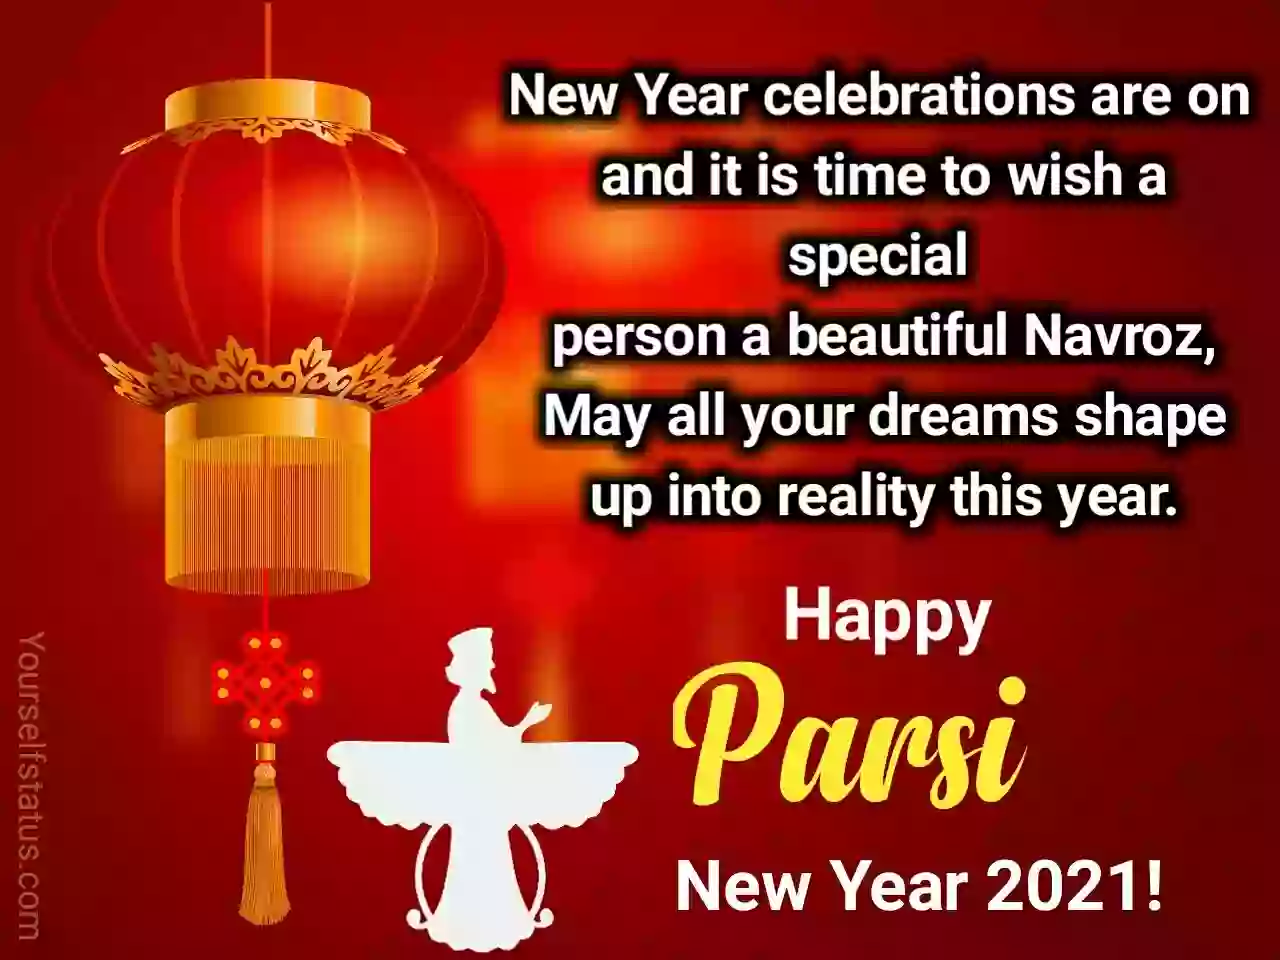 Parsi new year wishes in english